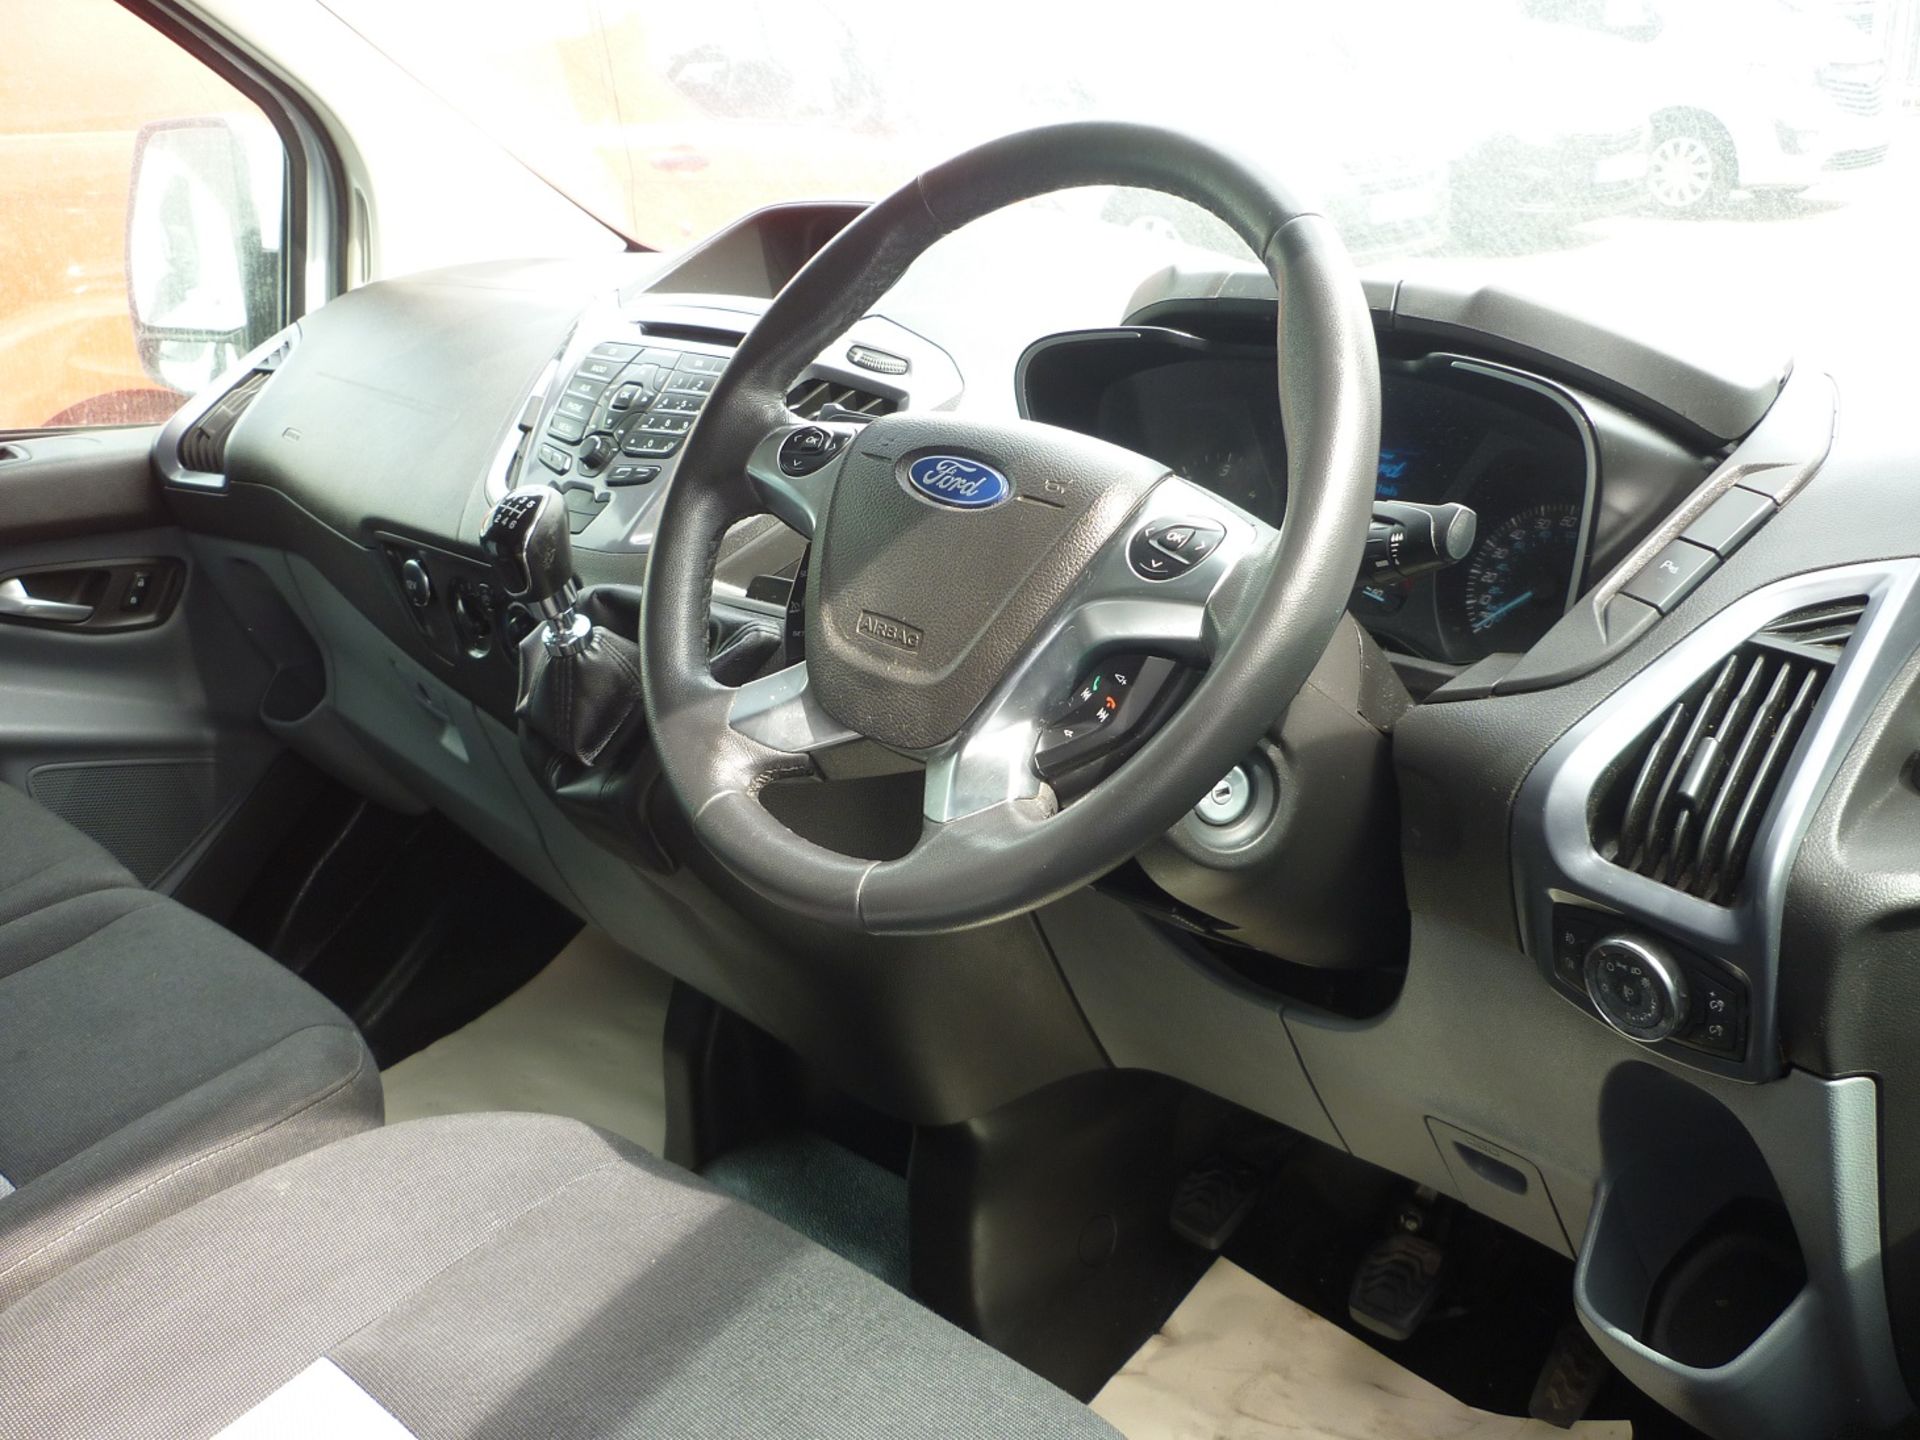 2015/15 REG FORD TRANSIT CUSTOM 270 LIMITED EDITION 125PS DIESEL PANEL VAN, SHOWING 0 FORMER KEEPERS - Image 5 of 5